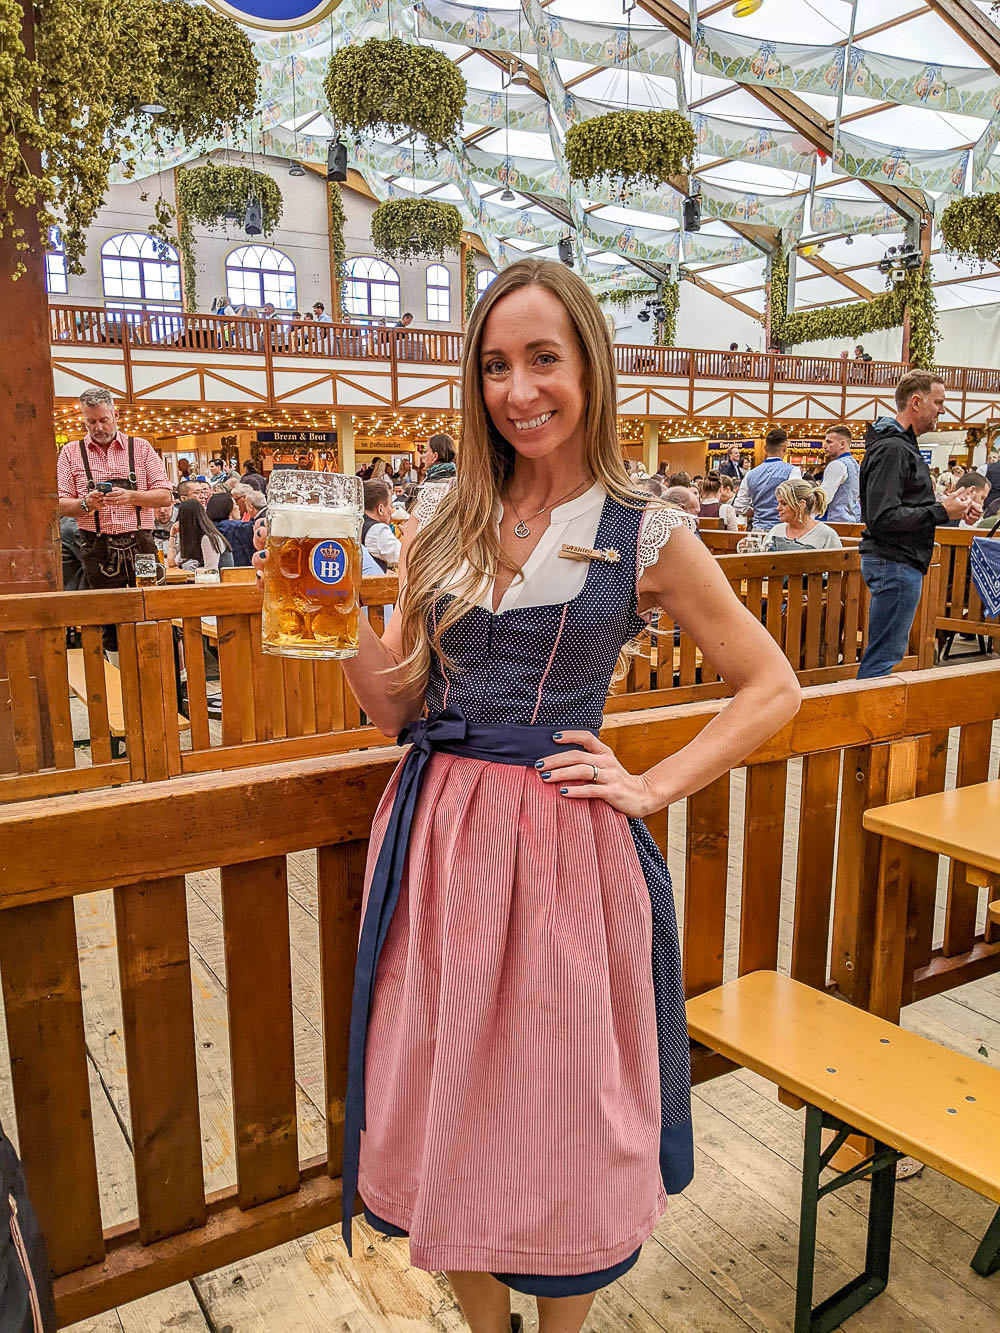 me in a pink and blue dirndl inside a beer tent at oktoberfest